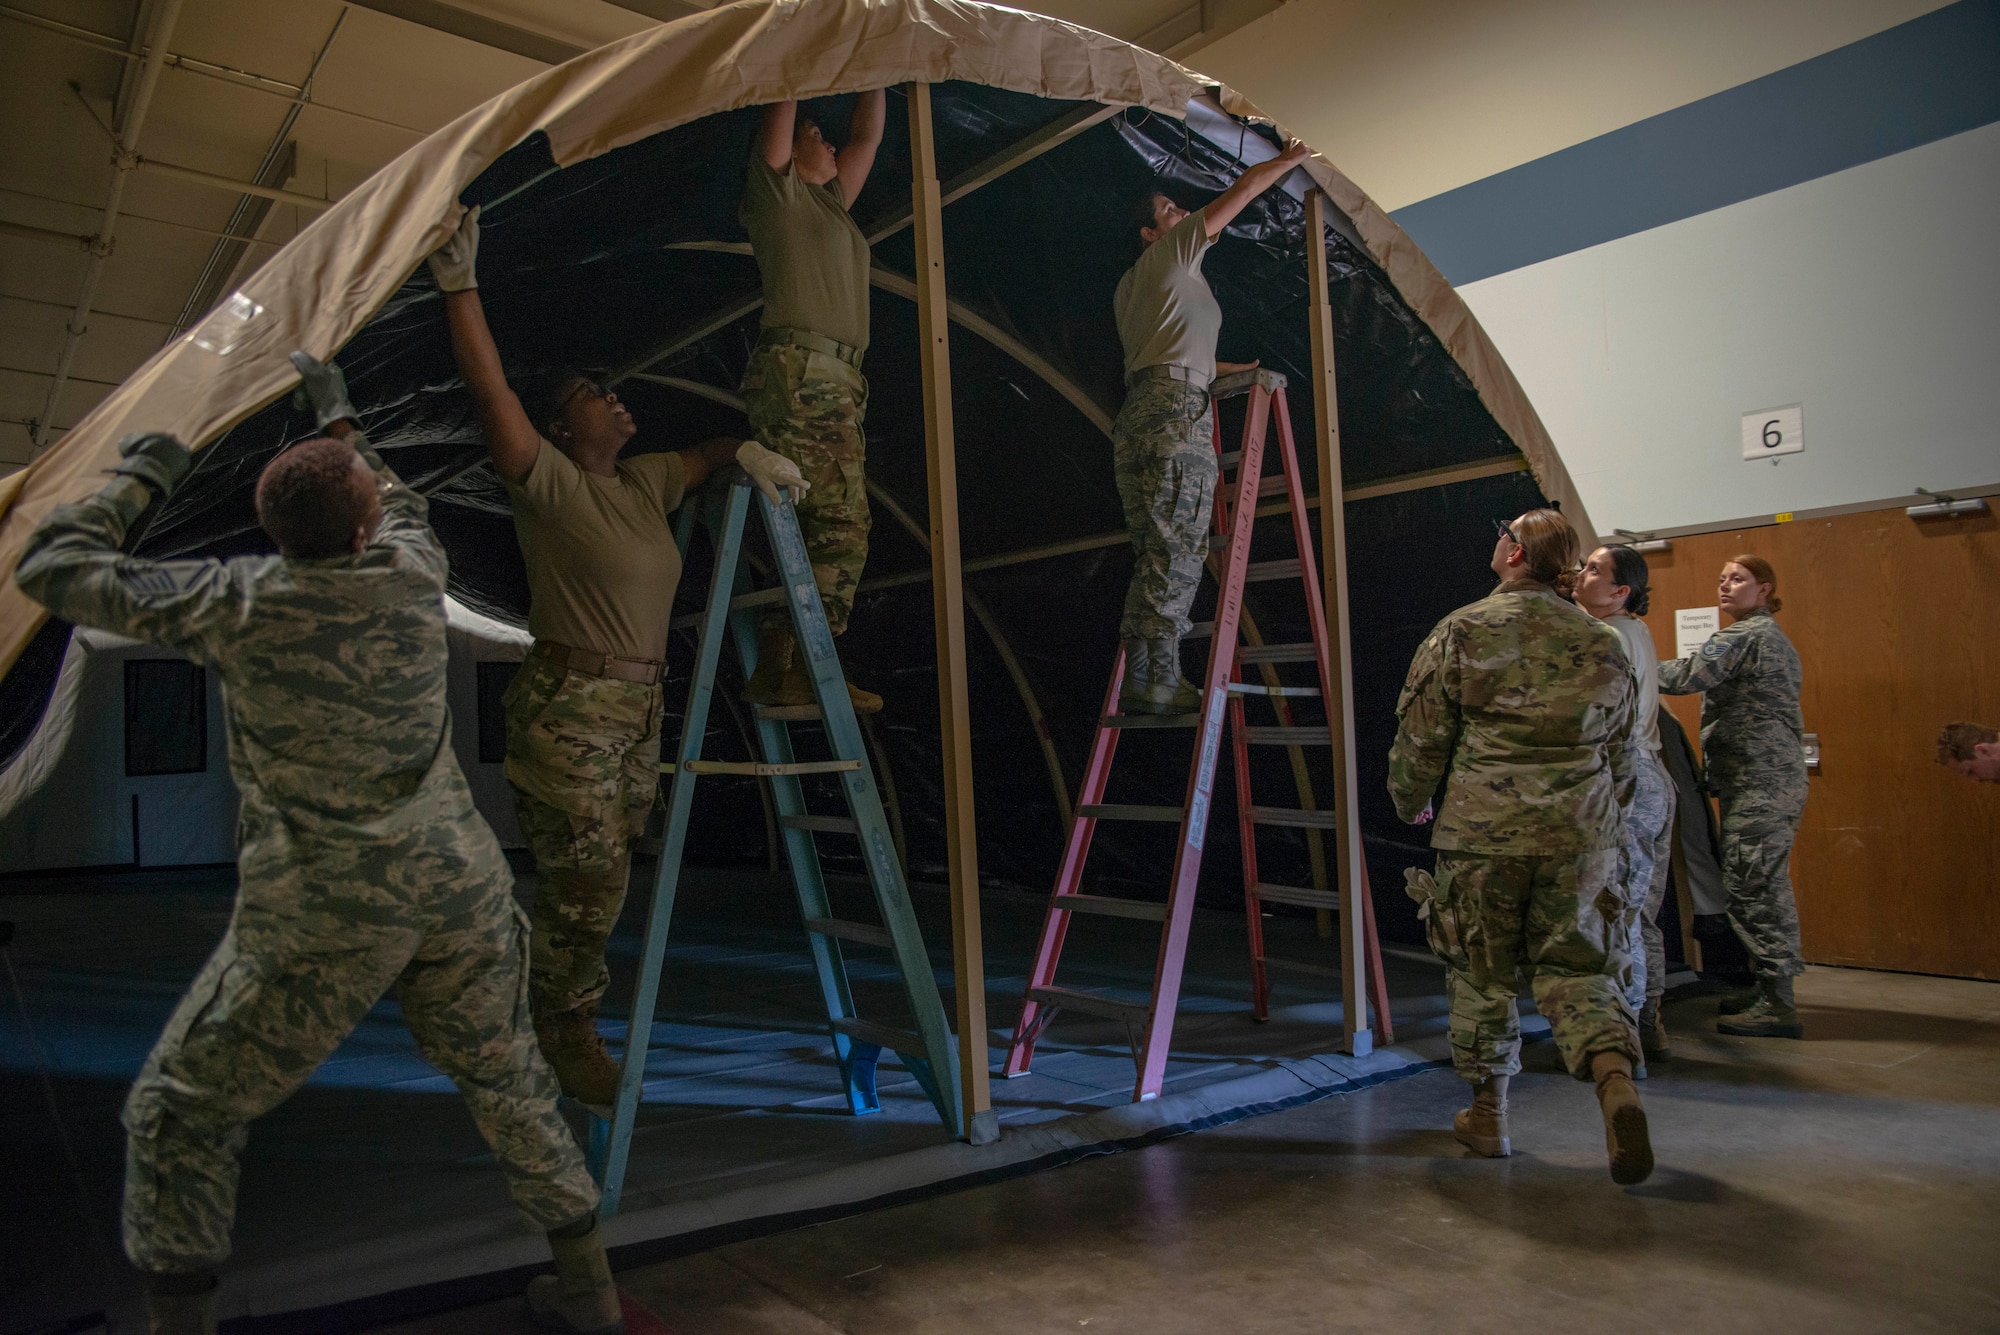 913th Force Support Squadron practices tent build operations at Little Rock Air Force Base, Ark, October 6, 2019. The ability to properly prepare and build a tent is essential for deployment or humanitarian environments. FSS provides the Air Force a range of services, from quality of life programs to combat support operations. (U.S. Air Force Reserve photo by Senior Airman Chase Cannon)